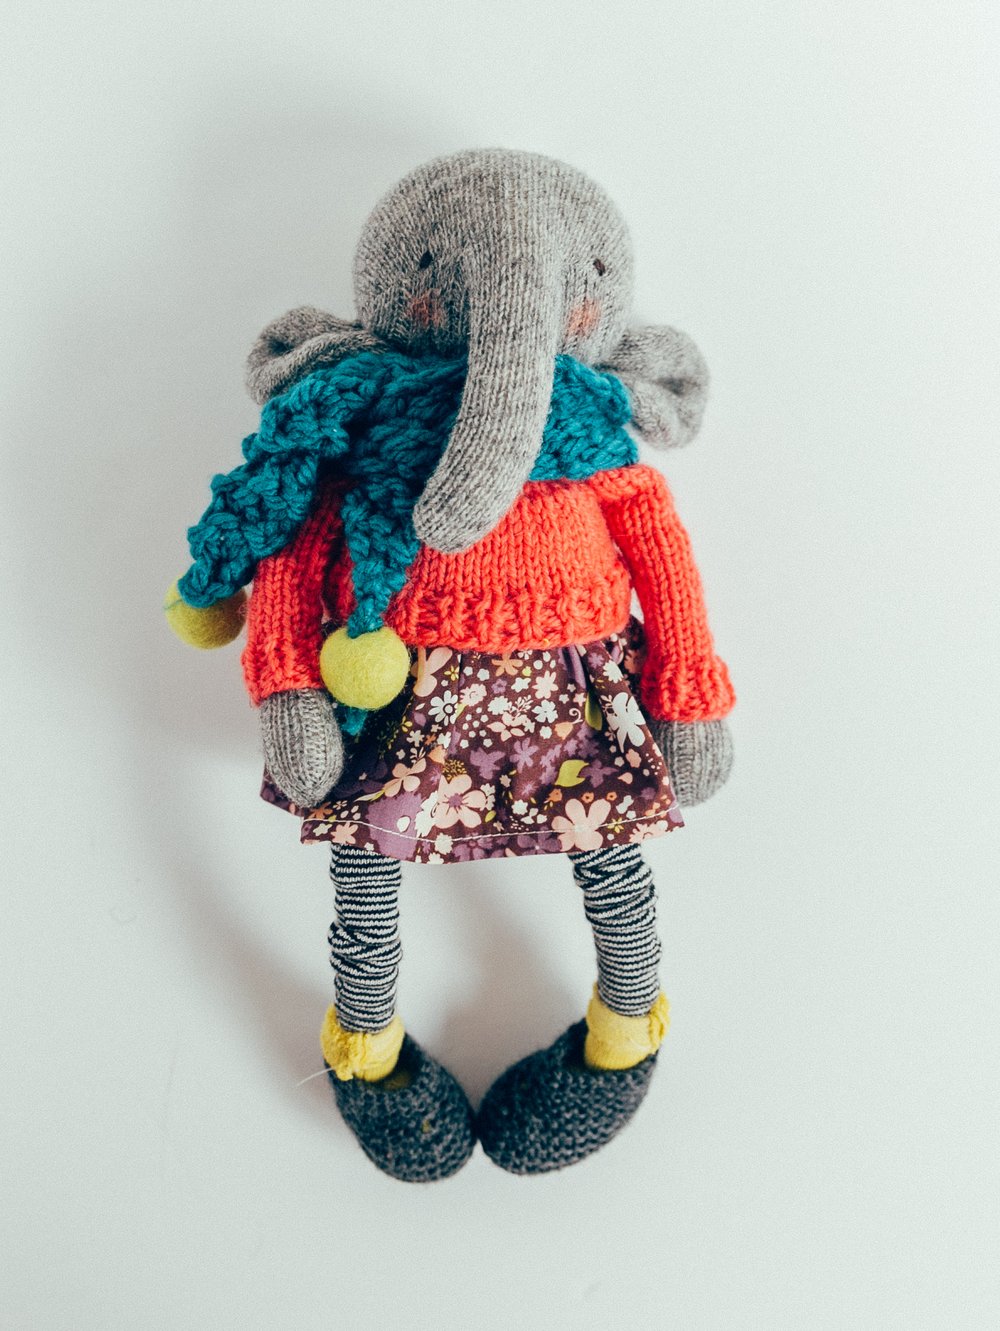 Image of Ailis - Wool Filled Sculpted Sock Elephant with removable sweater, scarf, dress, socks and shoes